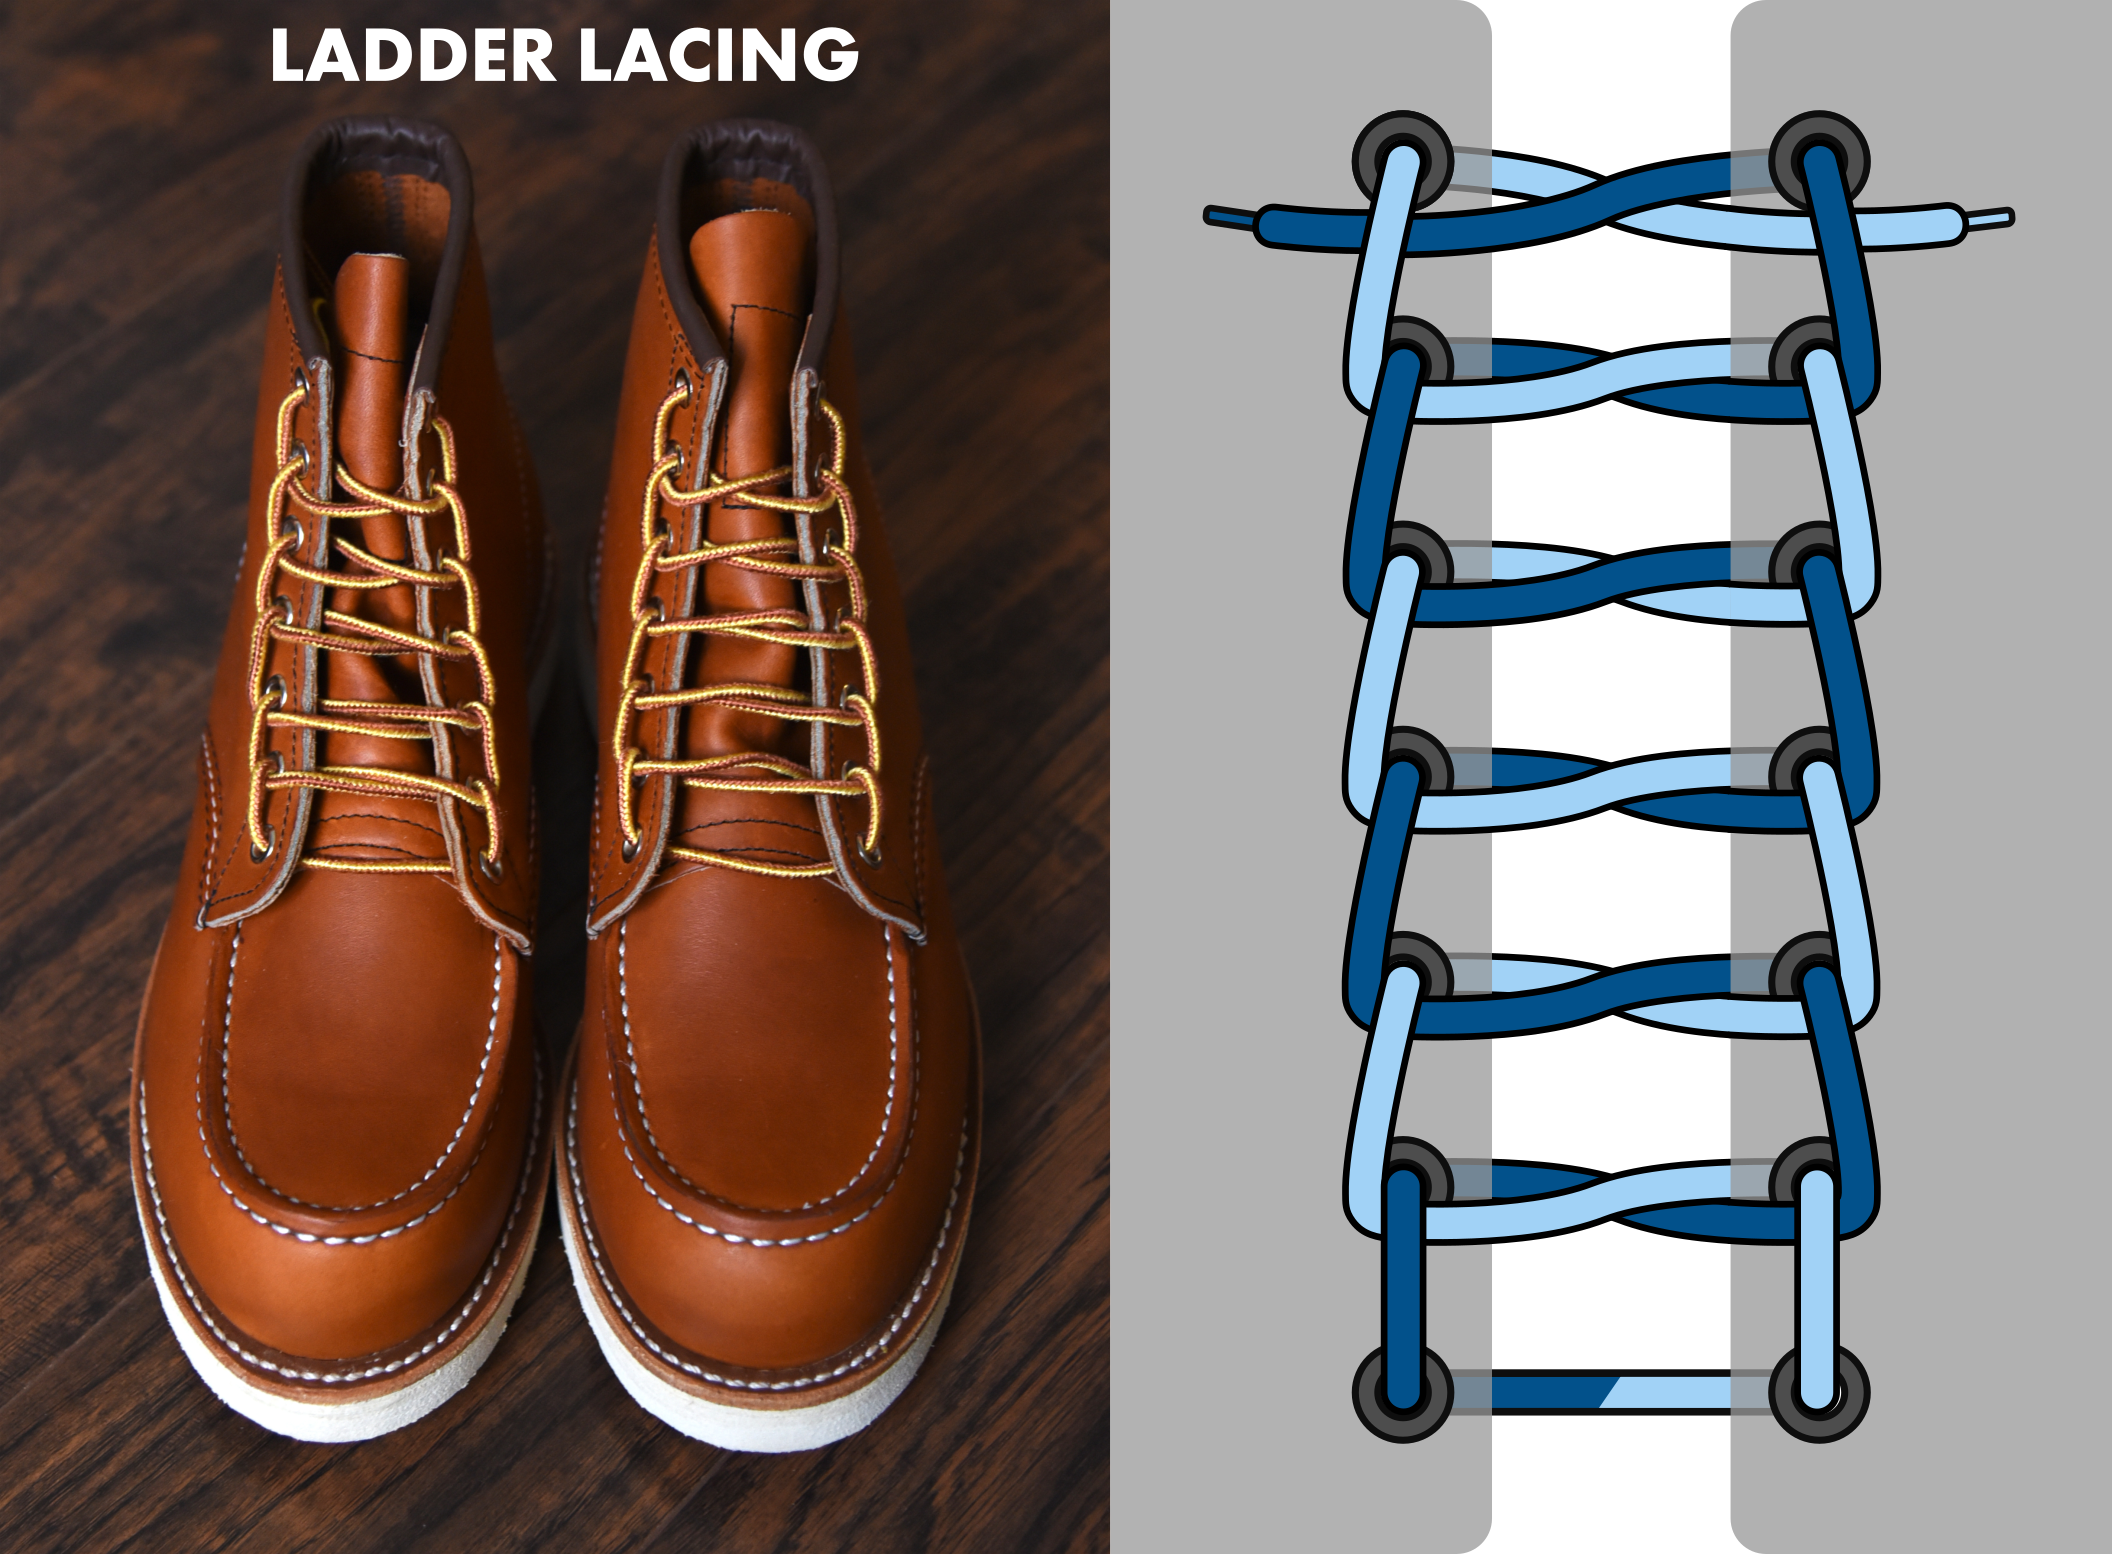 Ladder lacing diagram for boots